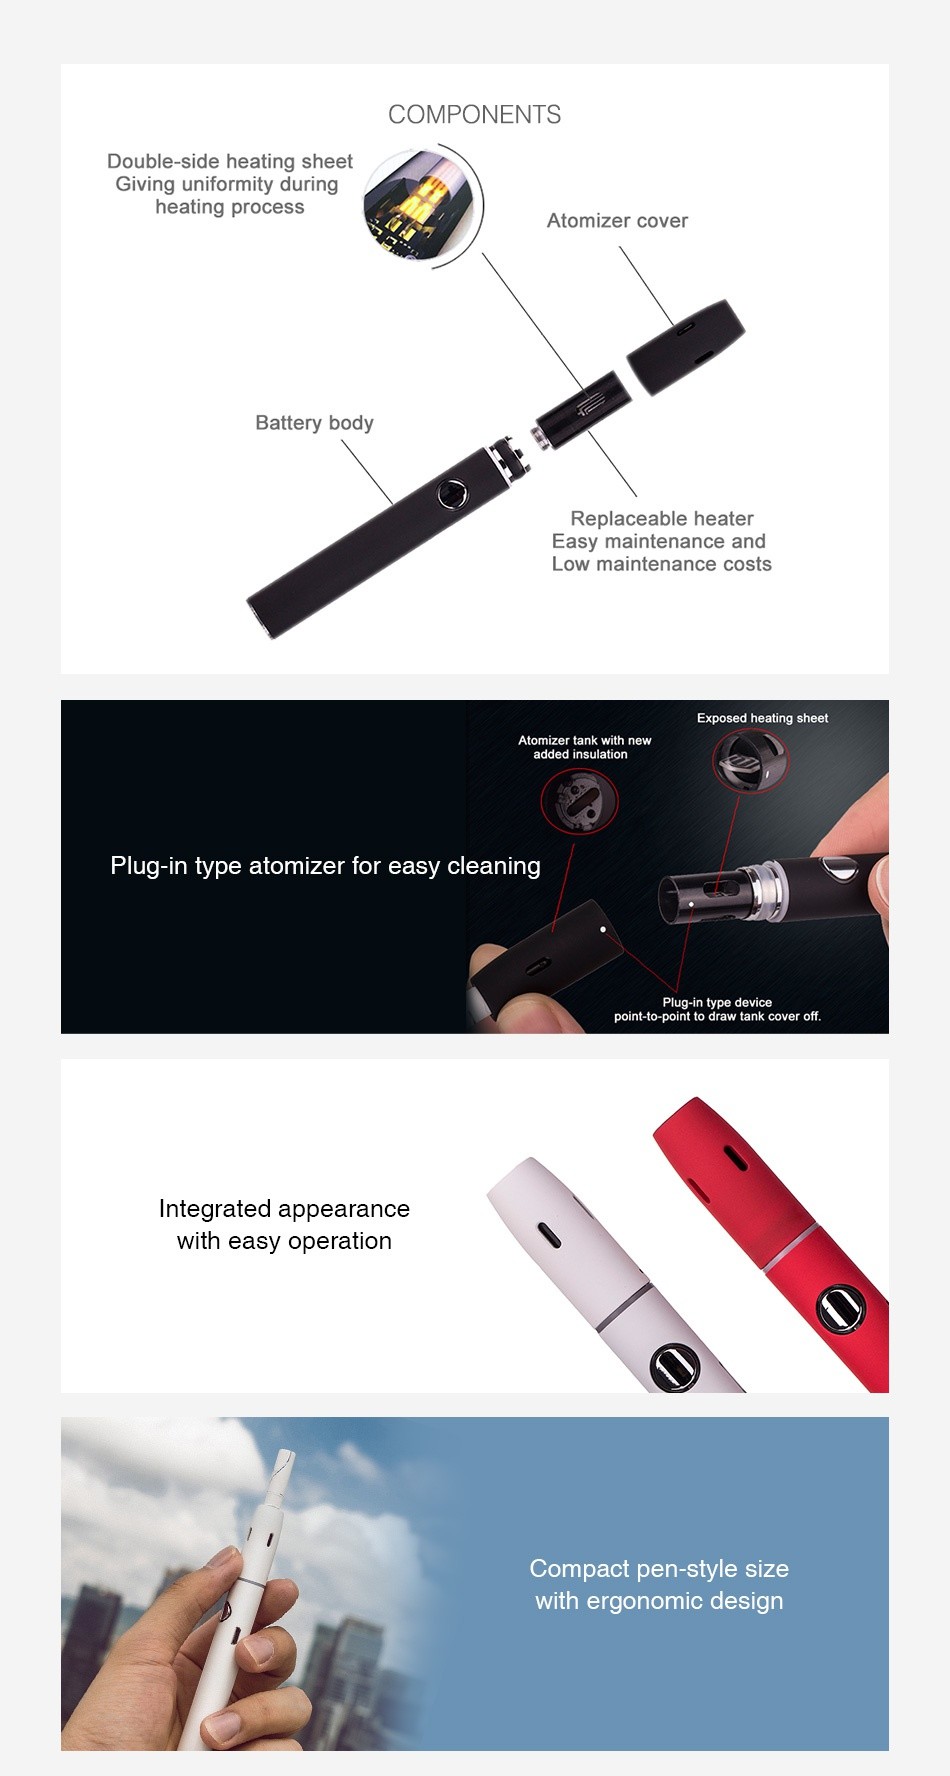 Kamry Kecig 2.0 Plus Heating Kit 650mAh COMPONENTS Double side heating sheet Giving uniformity during heating process Atomizer cover Battery body Replaceable heater Easy maintenance and Low maintenance costs Plug in type atomizer for easy cleaning Integrated appearance Compact pen style ith ergonomic design